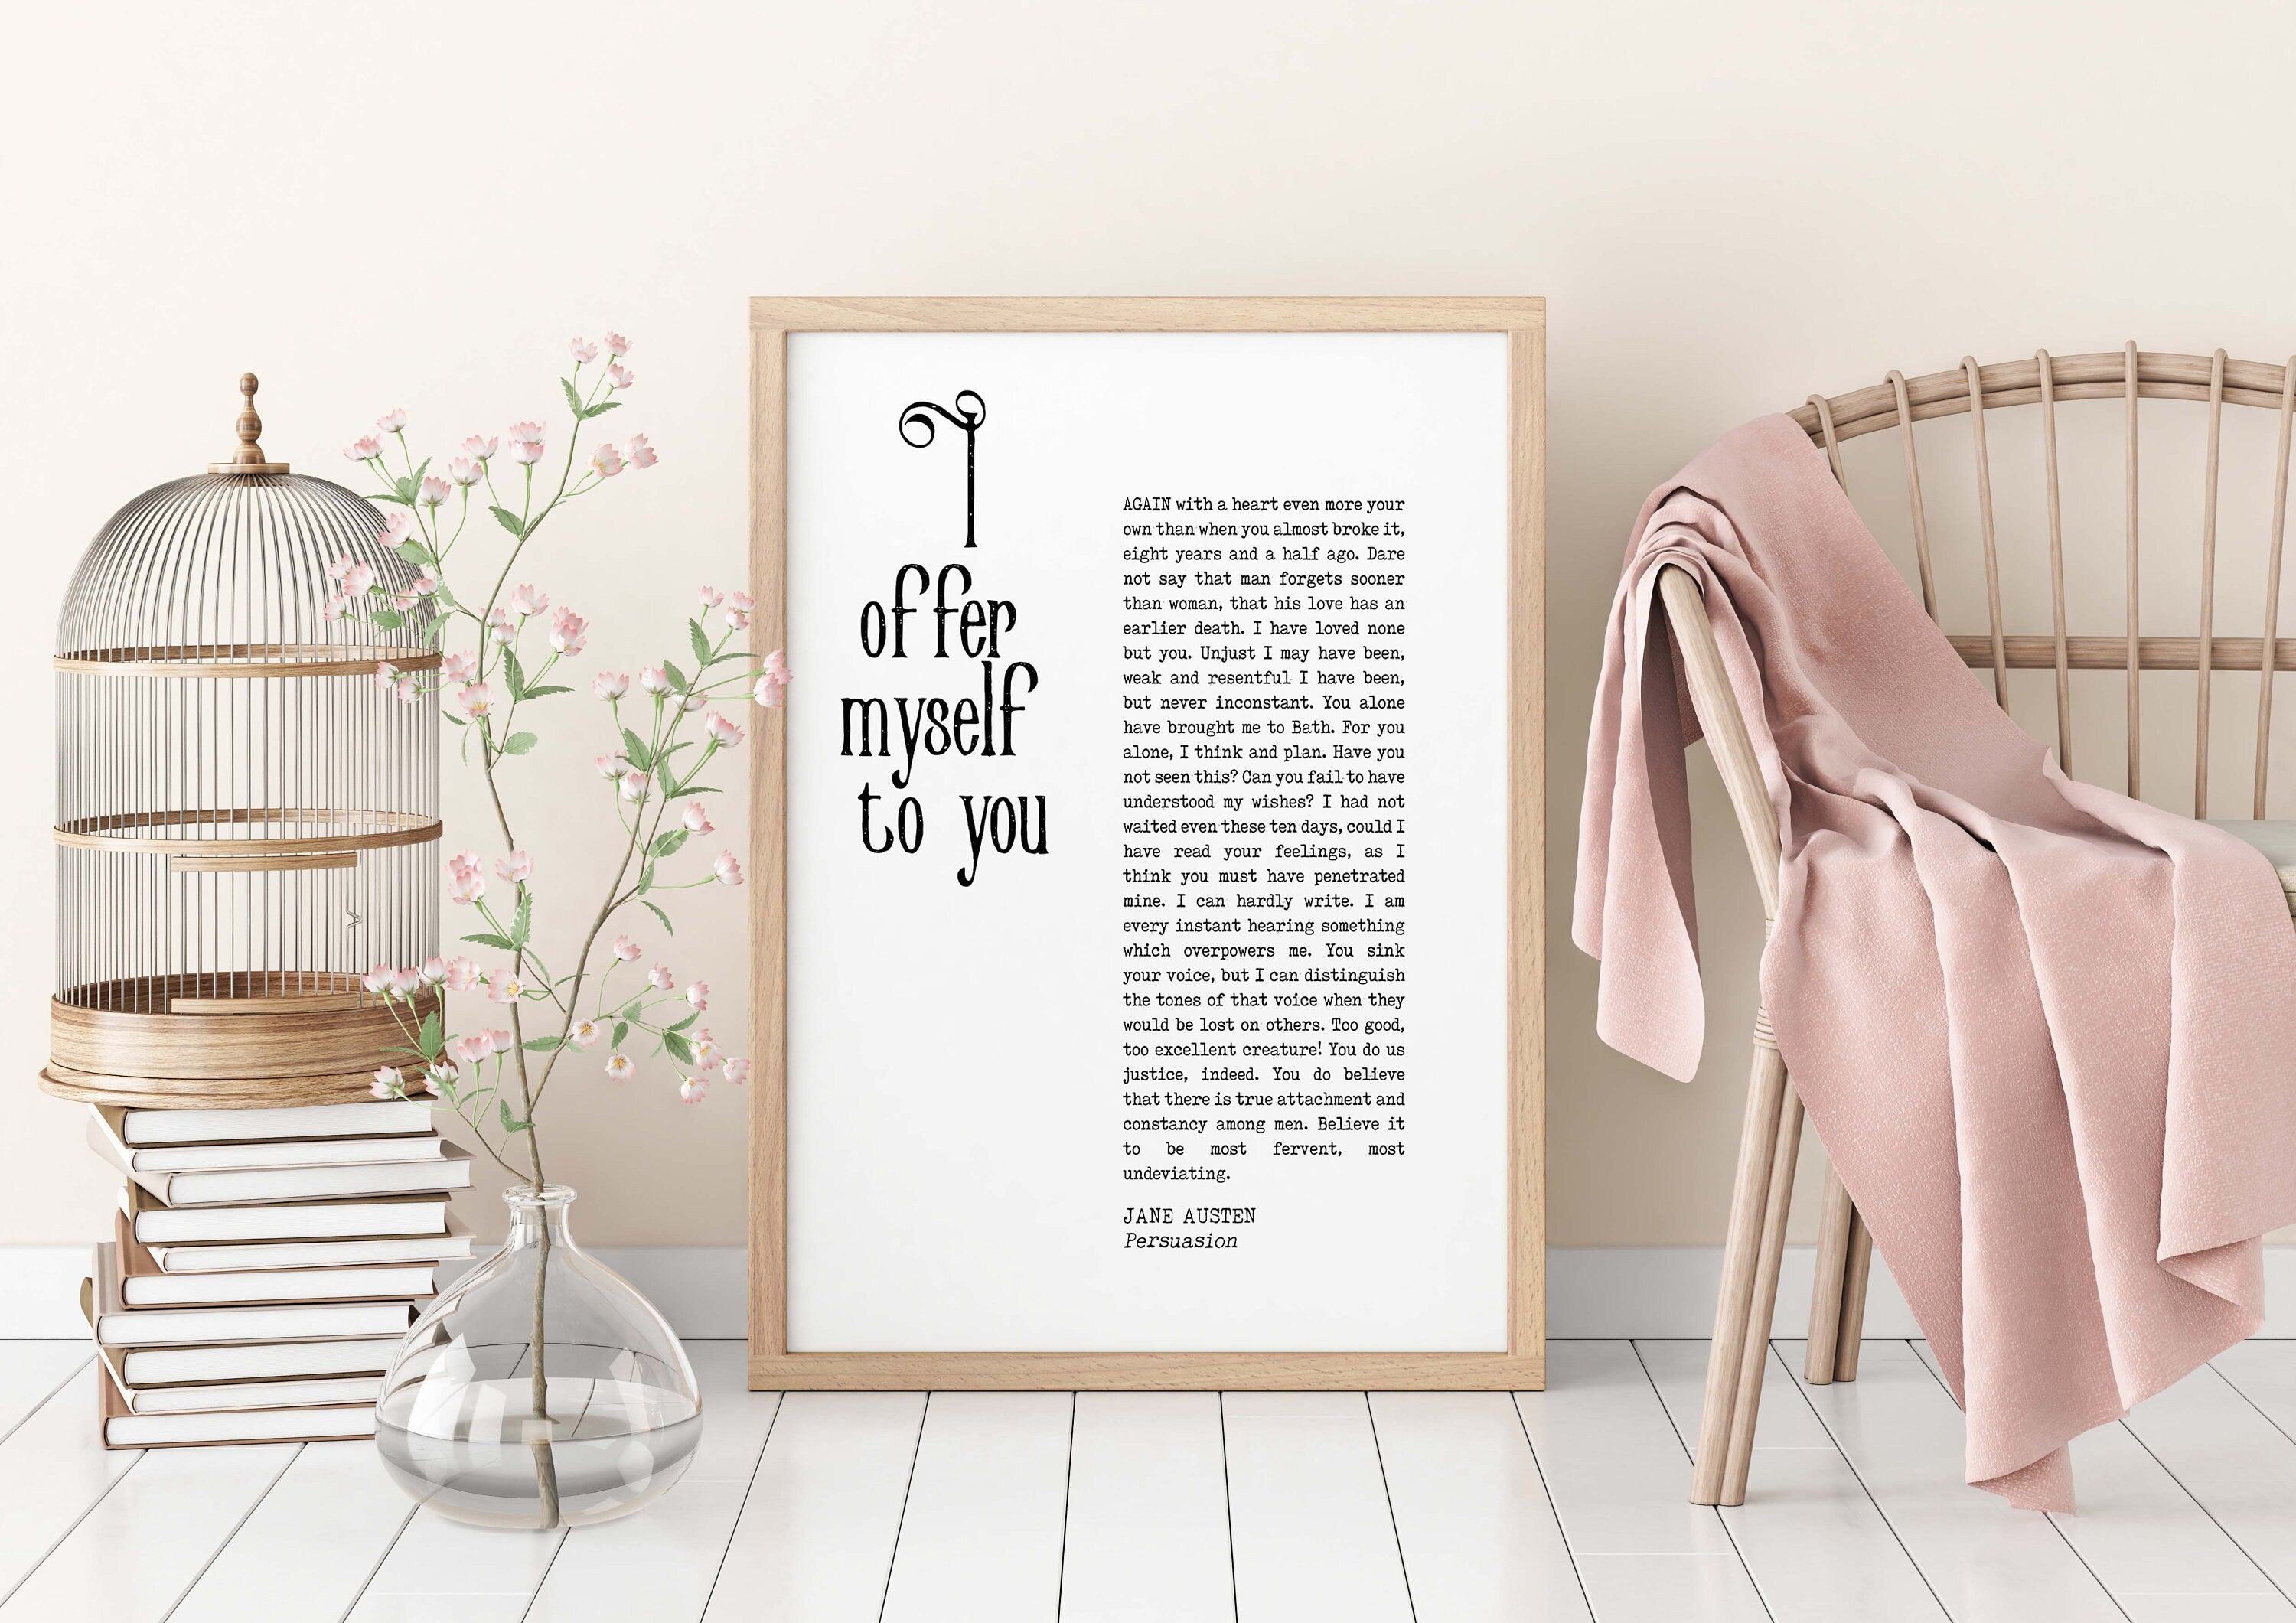 I Offer Myself To You Jane Austen Quote Wall Art Prints, Unframed Persuasion Book Quote Decor in Black & White